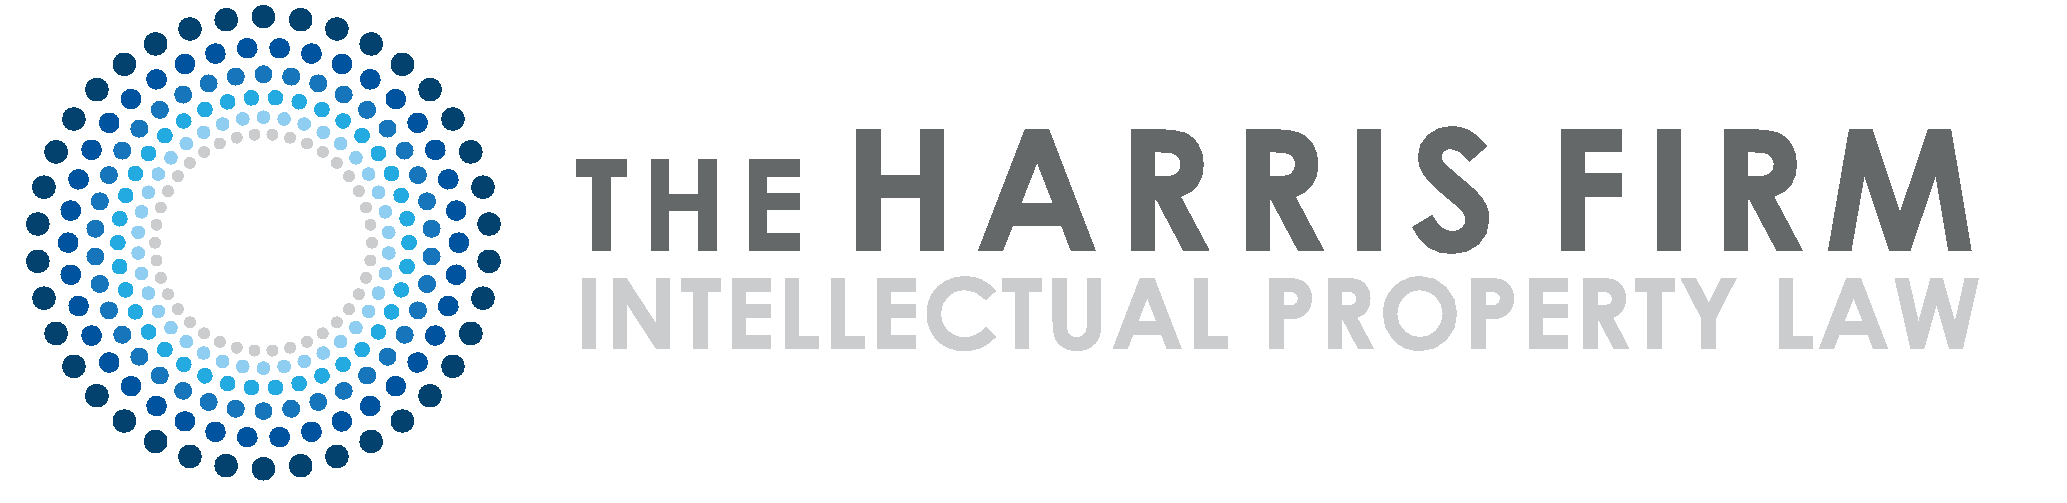 The Harris Firm featured image